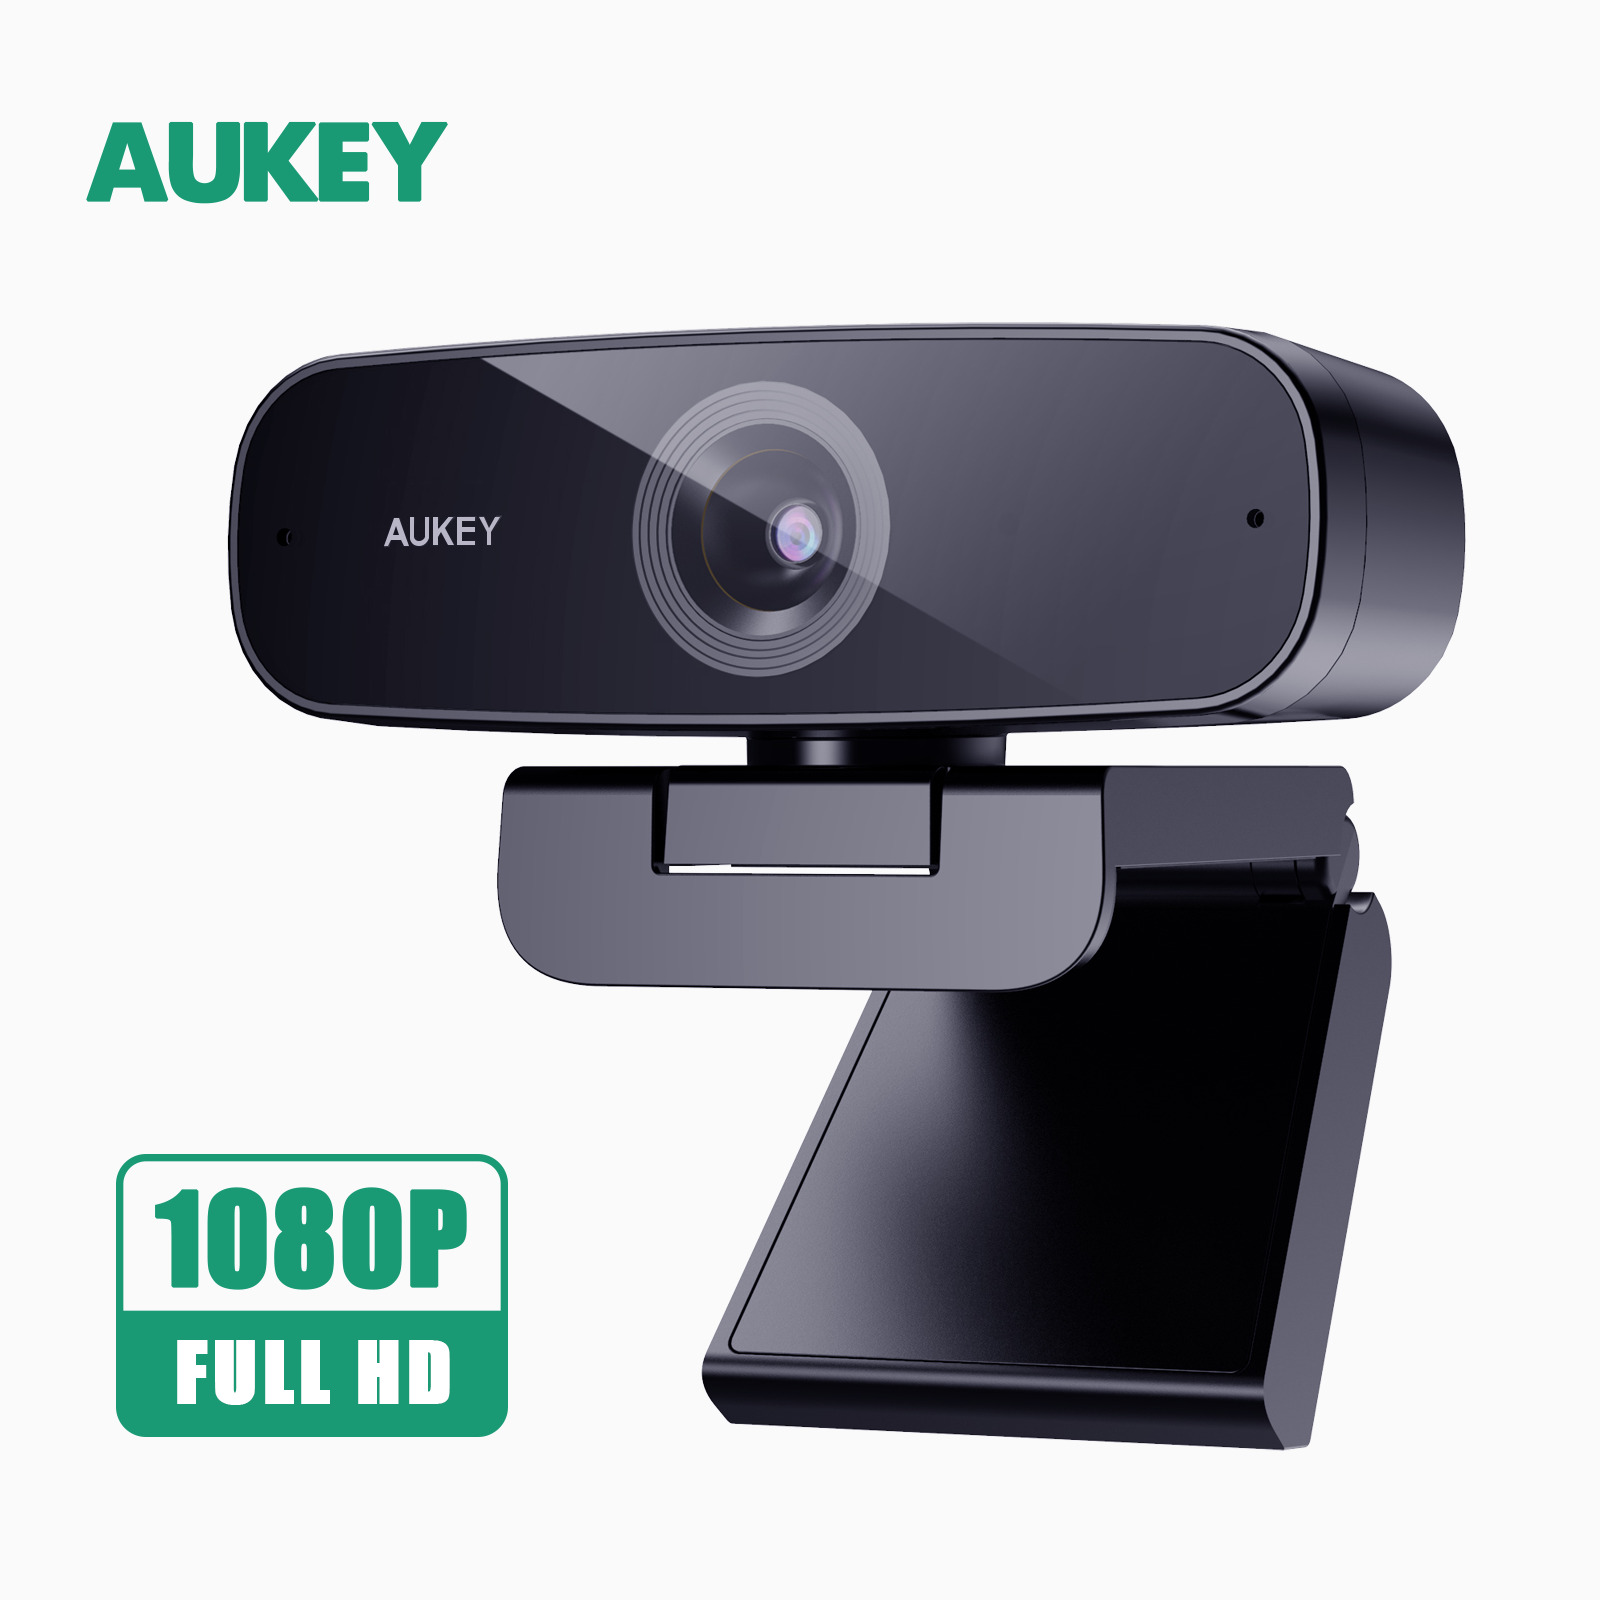 AUKEY 1080p Webcam with Microphone, Plug&Play for PC/Mac/Laptop/Macbook/Tablet